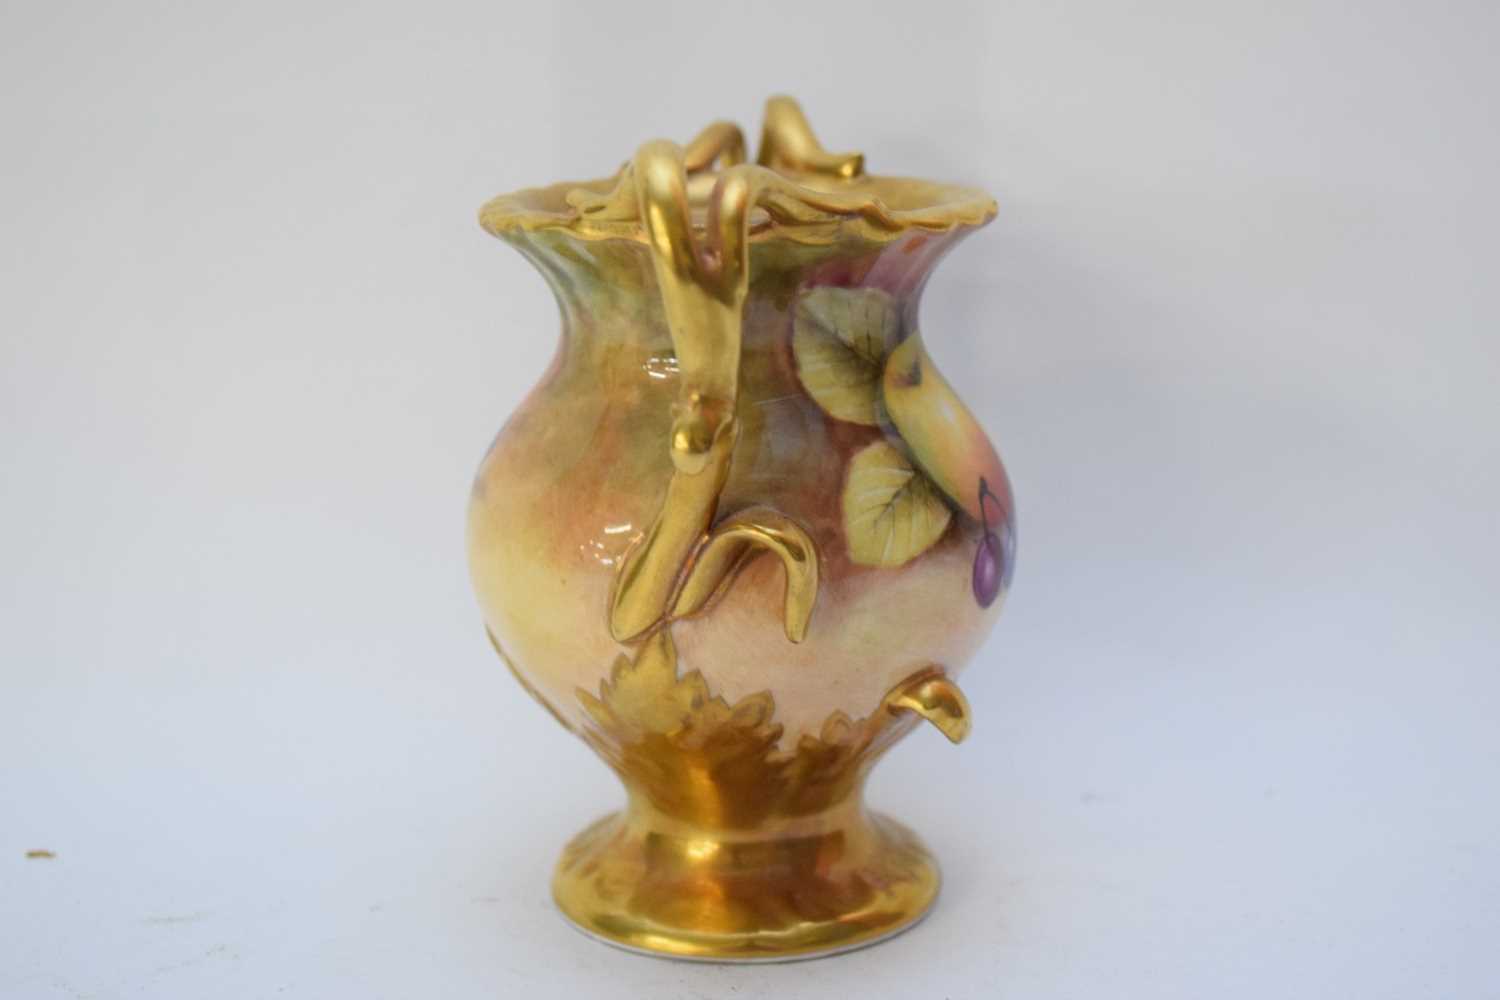 Coalport vase with gilt handles painted with fruit, signed by N Lear - Image 5 of 6